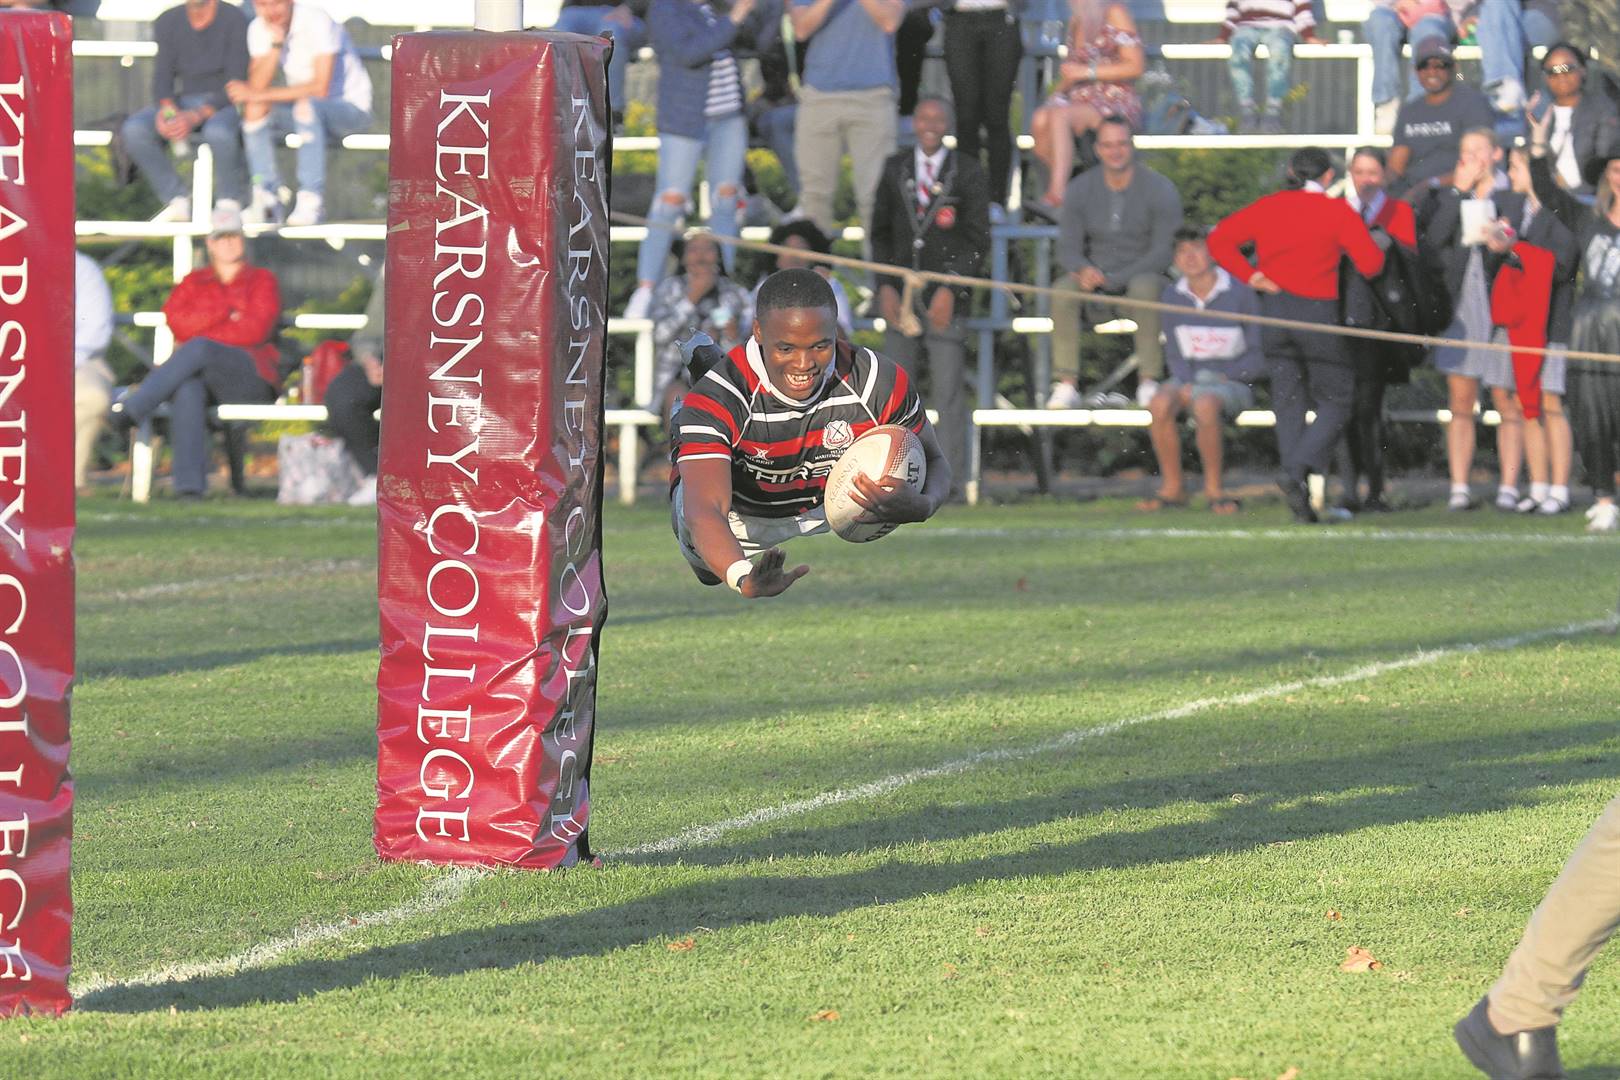 Maritzburg College’s full-back Spha Ngcobo flies across the line to score against Kearsney, which helped secure College’s 31-20 win. PHOTO: DAN BECKETT